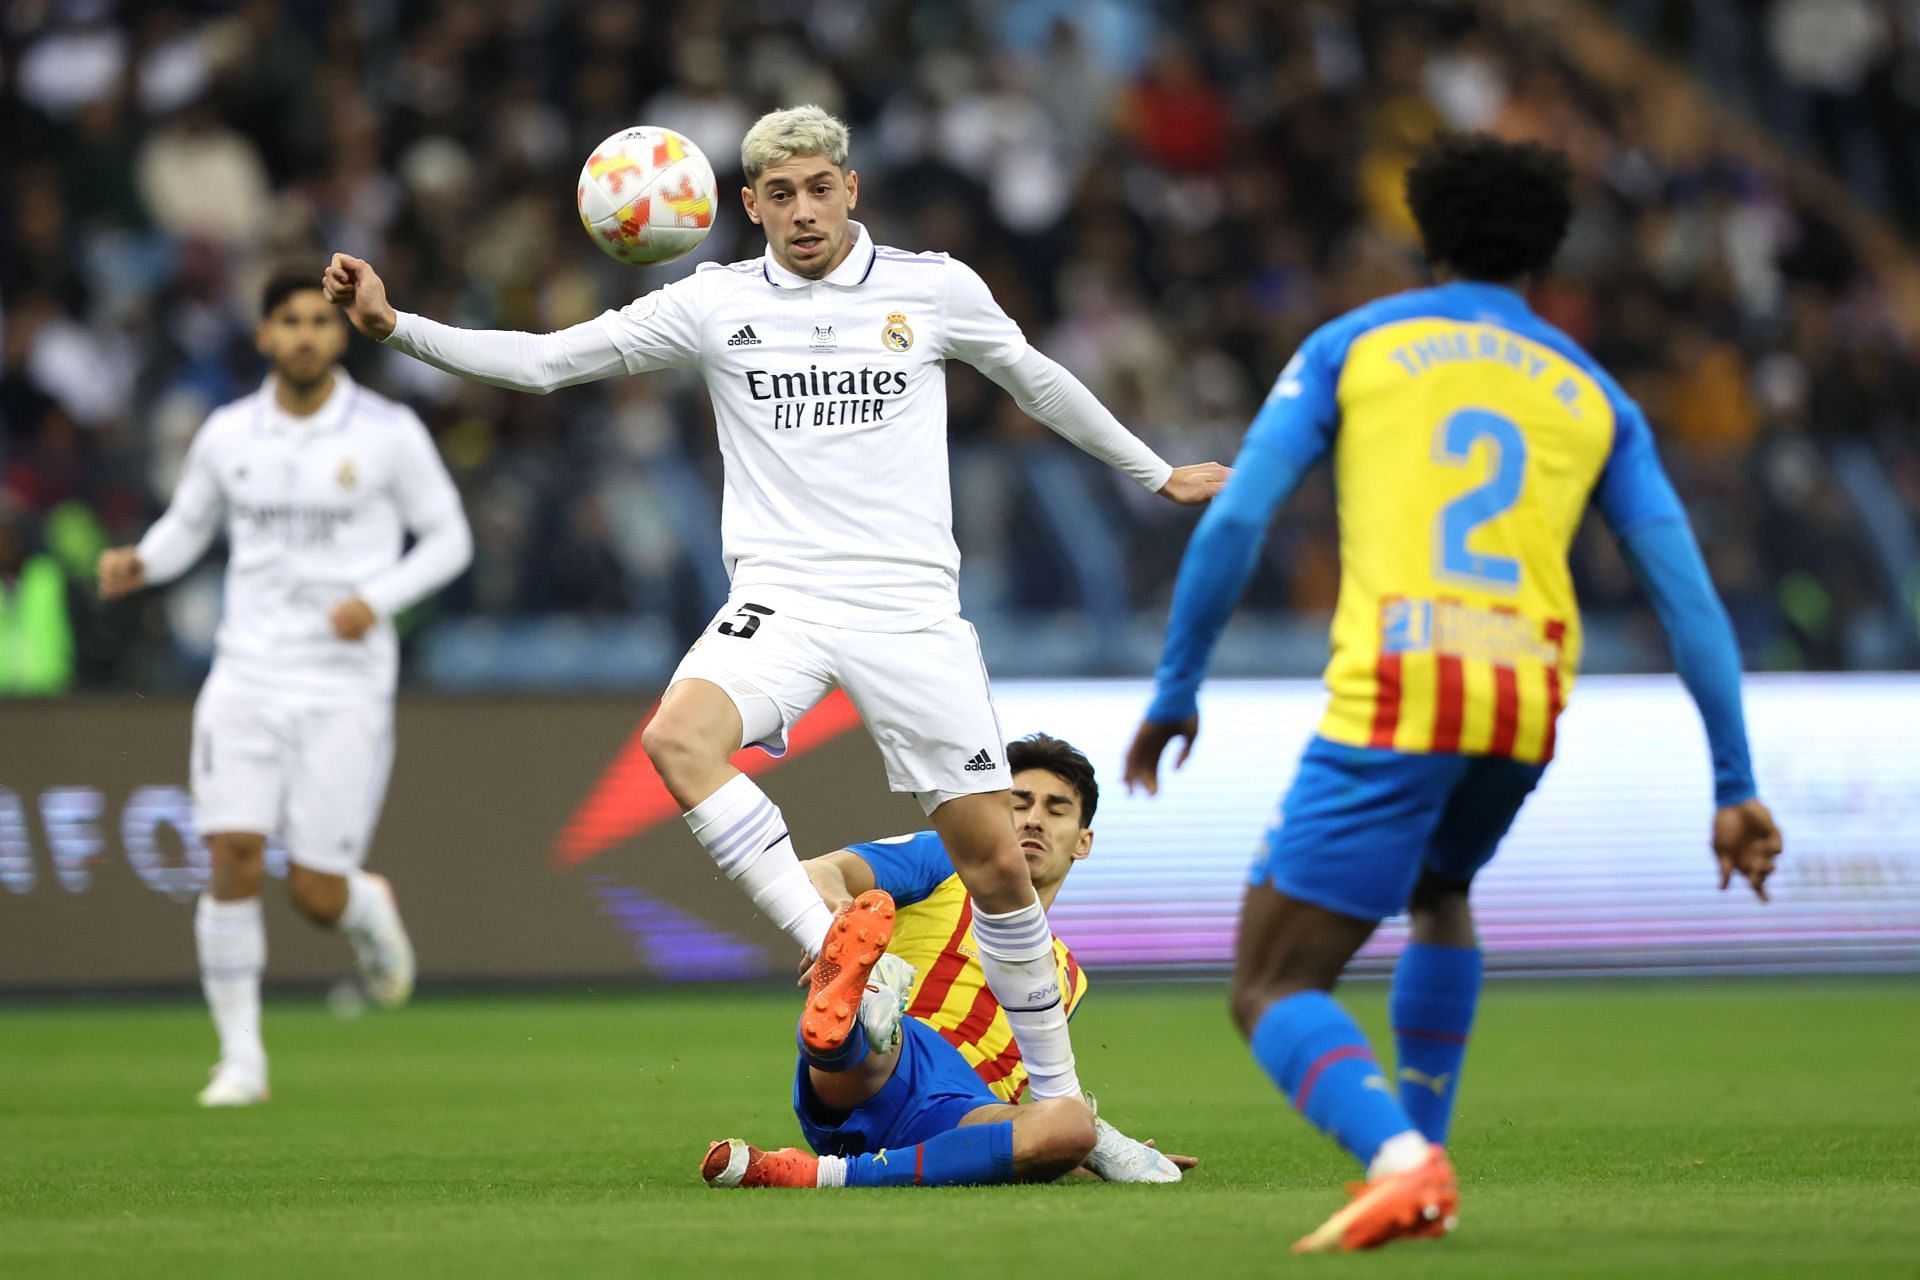 Federico Valverde’s recent form with Real Madrid has been a cause of concern.